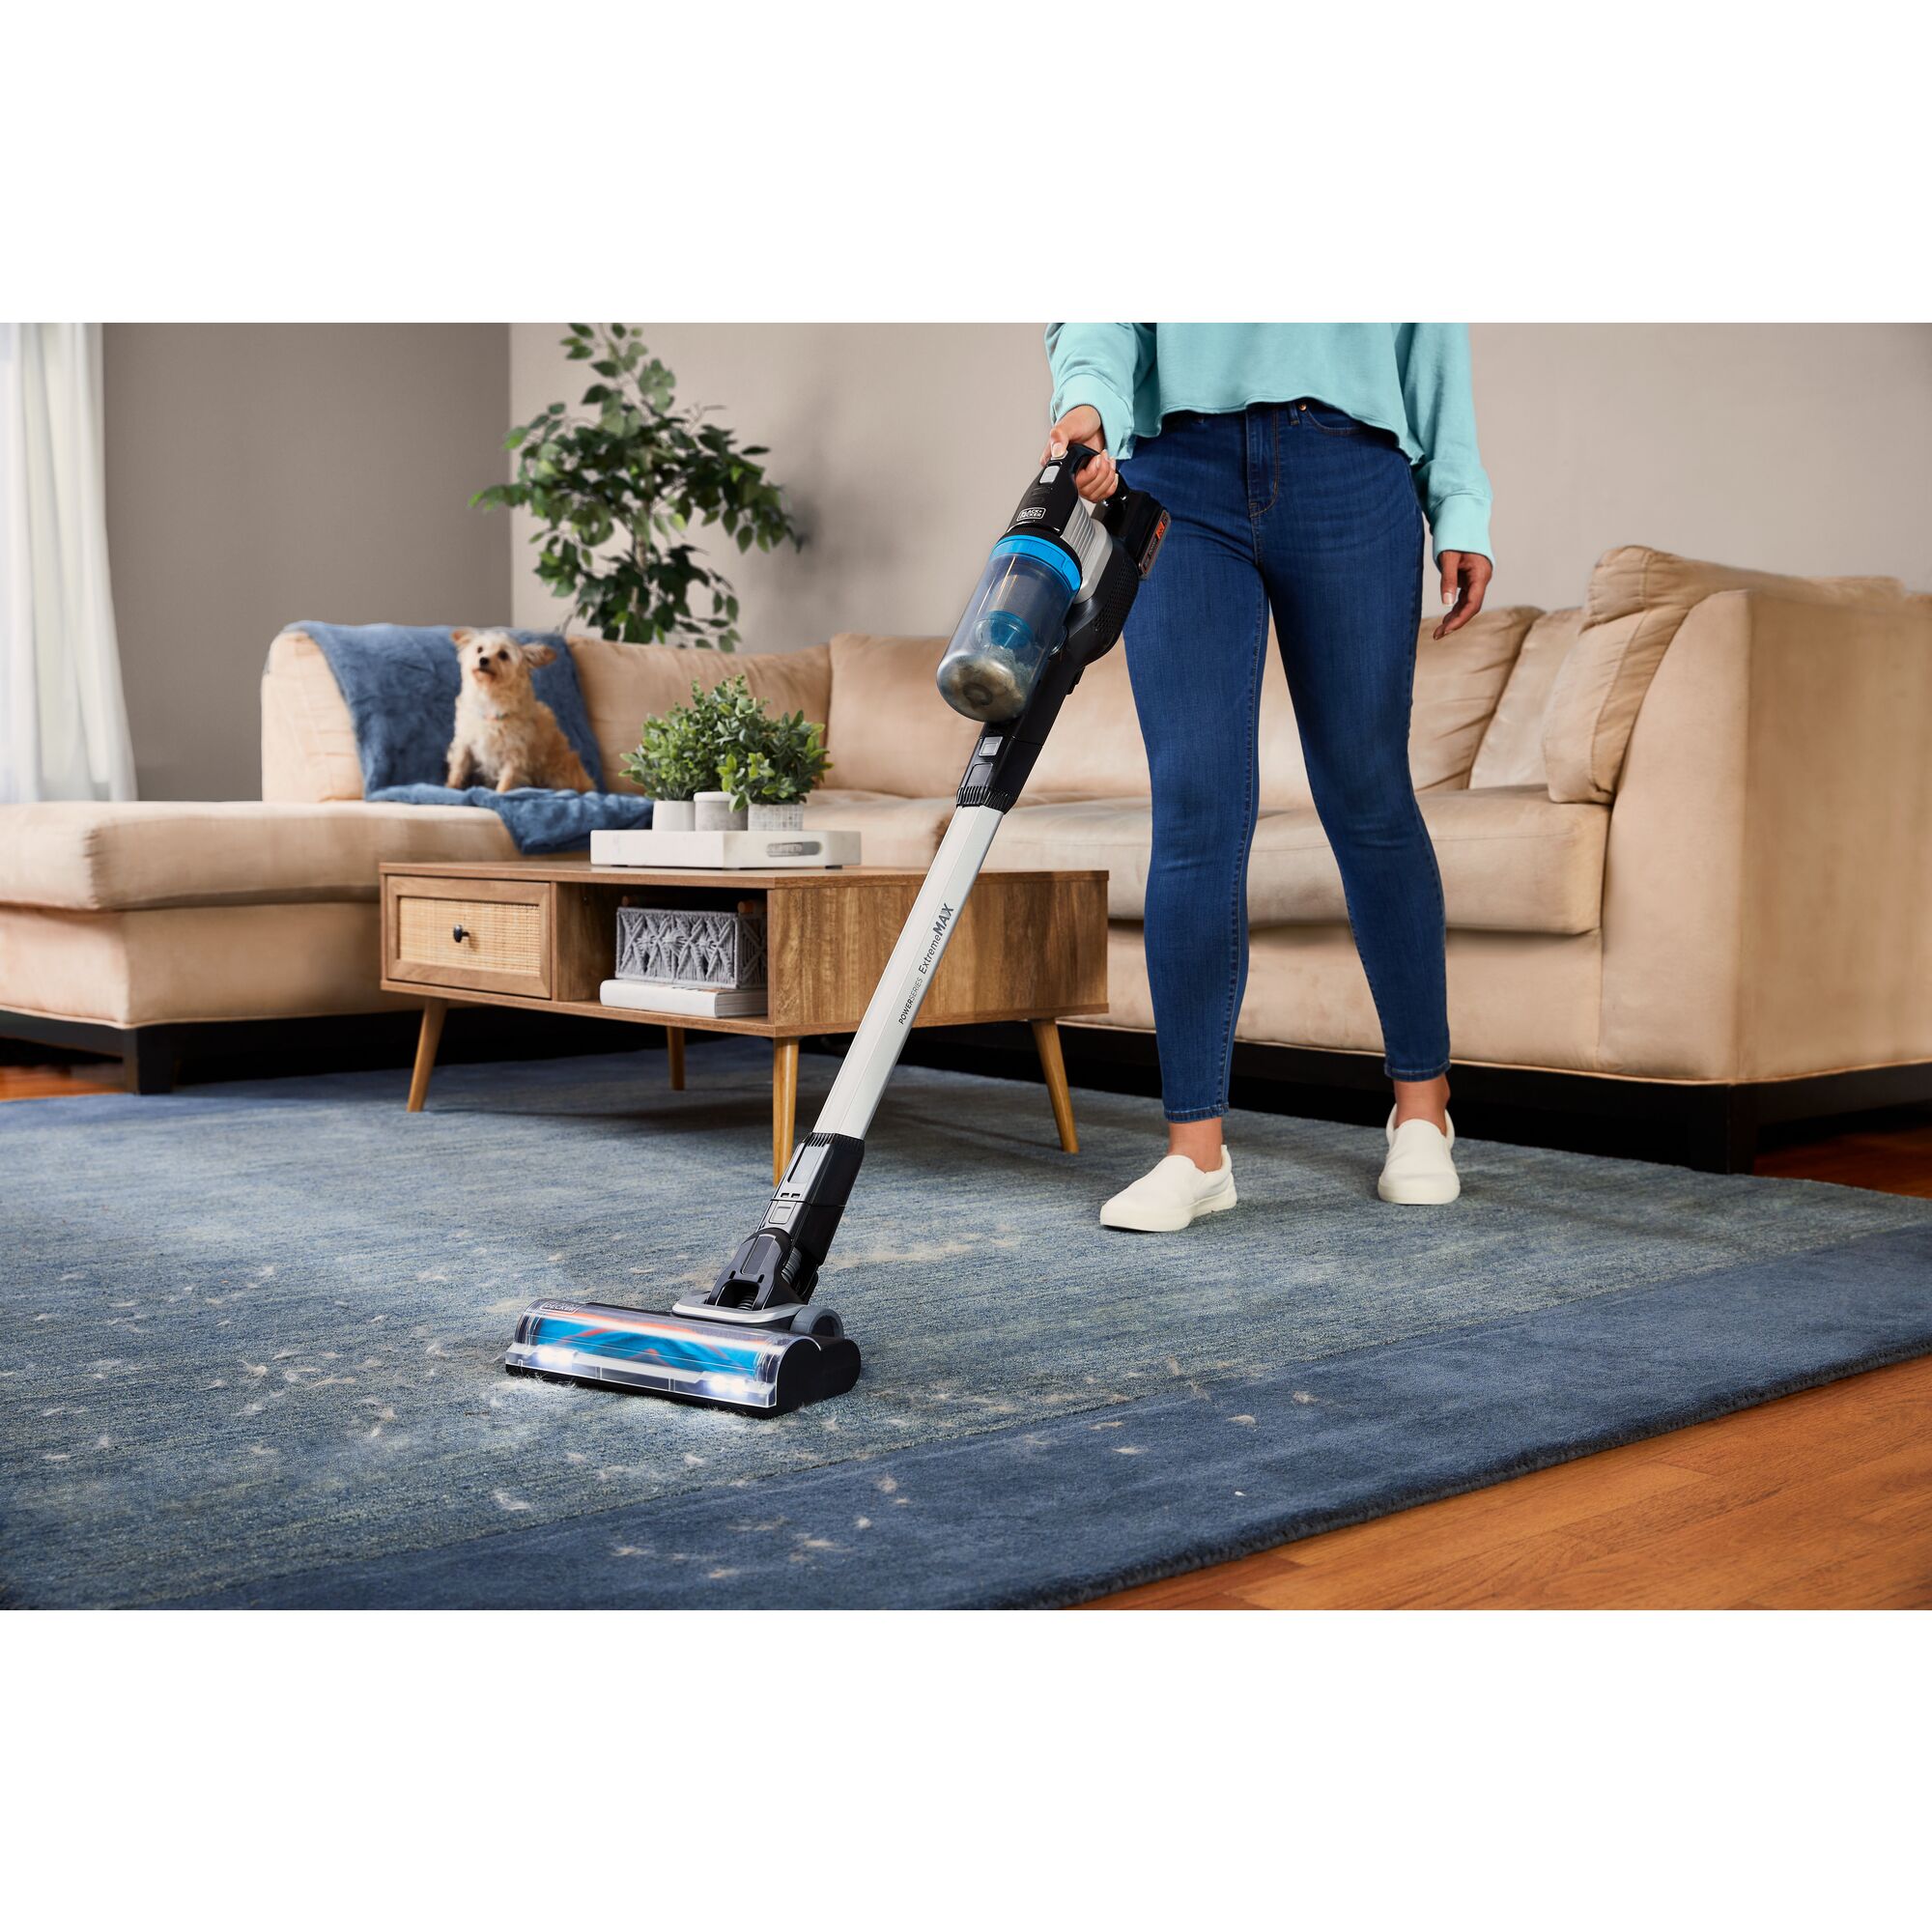 Woman vacuuming up dog hair with the POWERSERIES Extreme MAX cordless stick vac